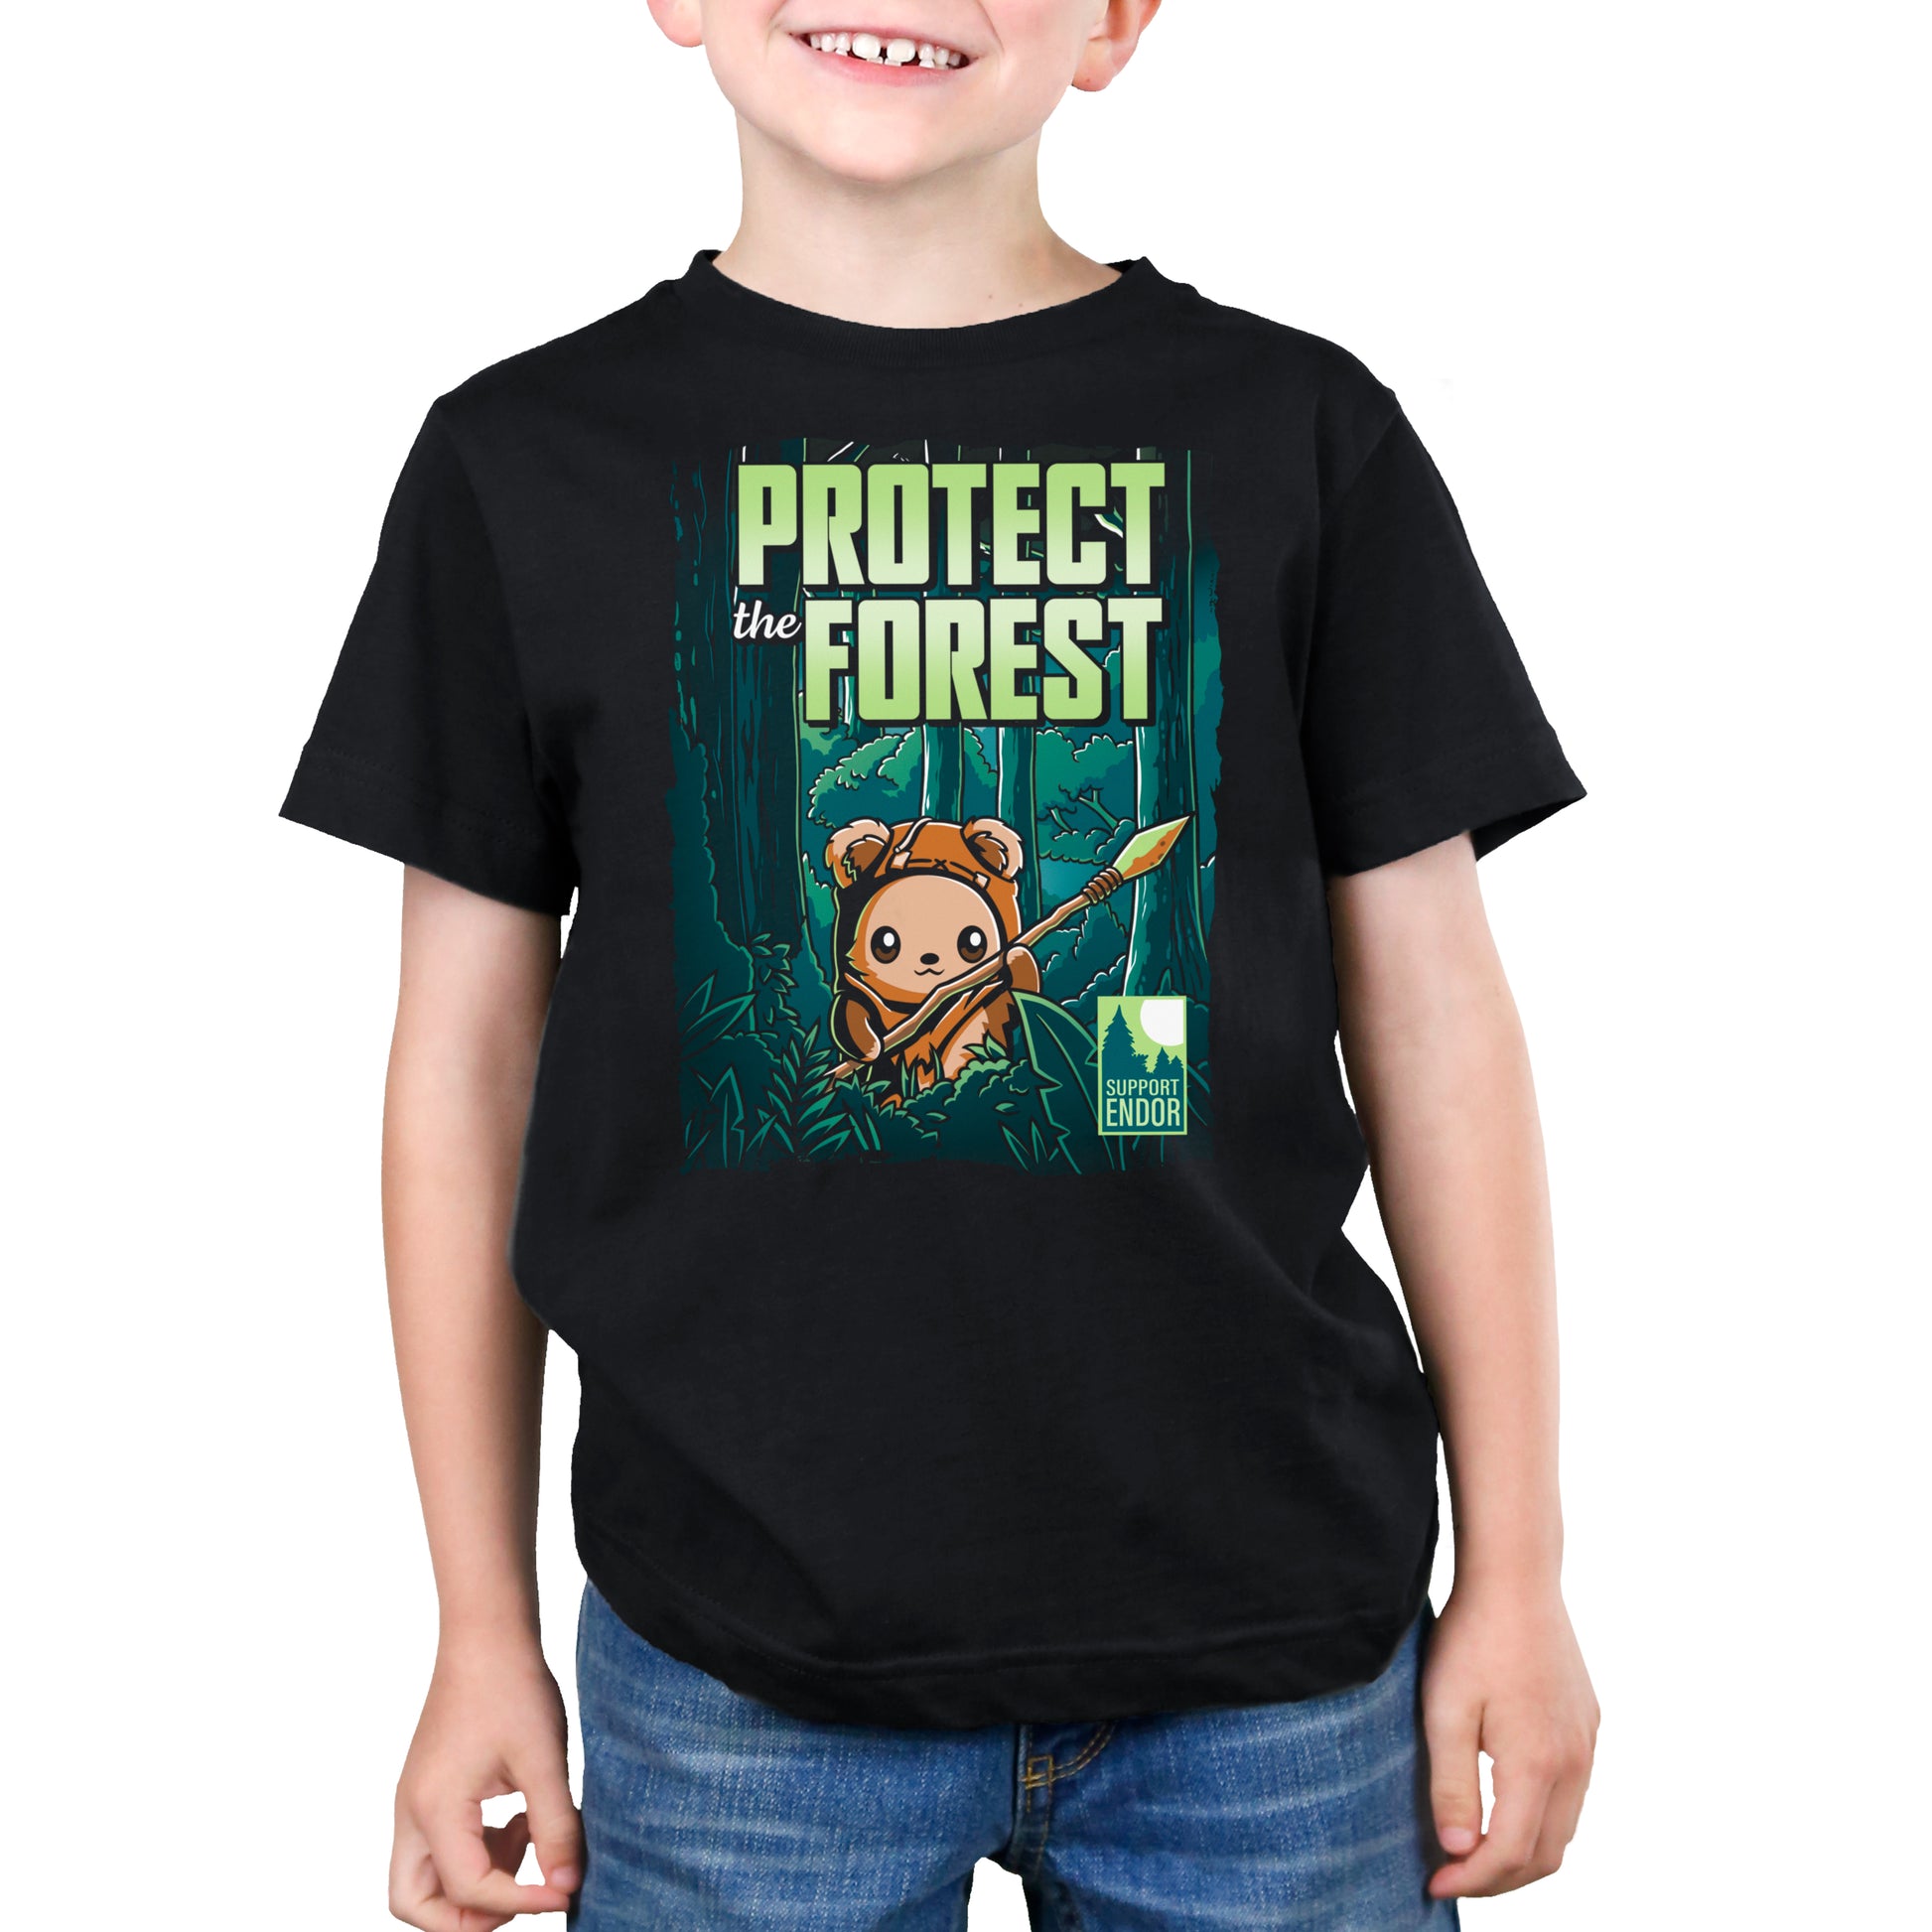 Officially licensed Star Wars "Protect the Forest" kids t-shirt that protects the forest.